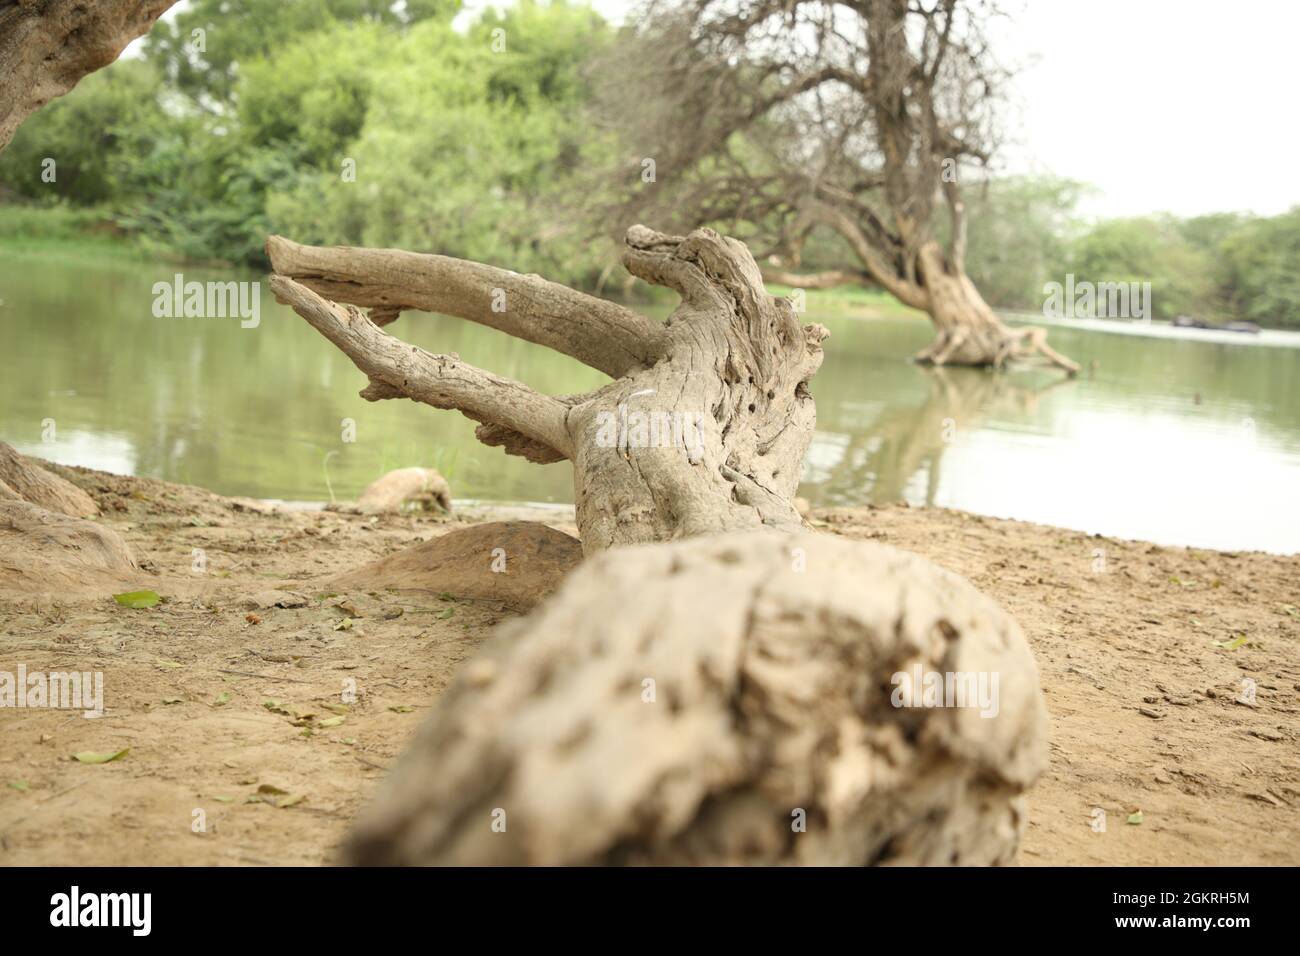 Dry tree looks like a horse near village pond in Indian punjab Stock Photo